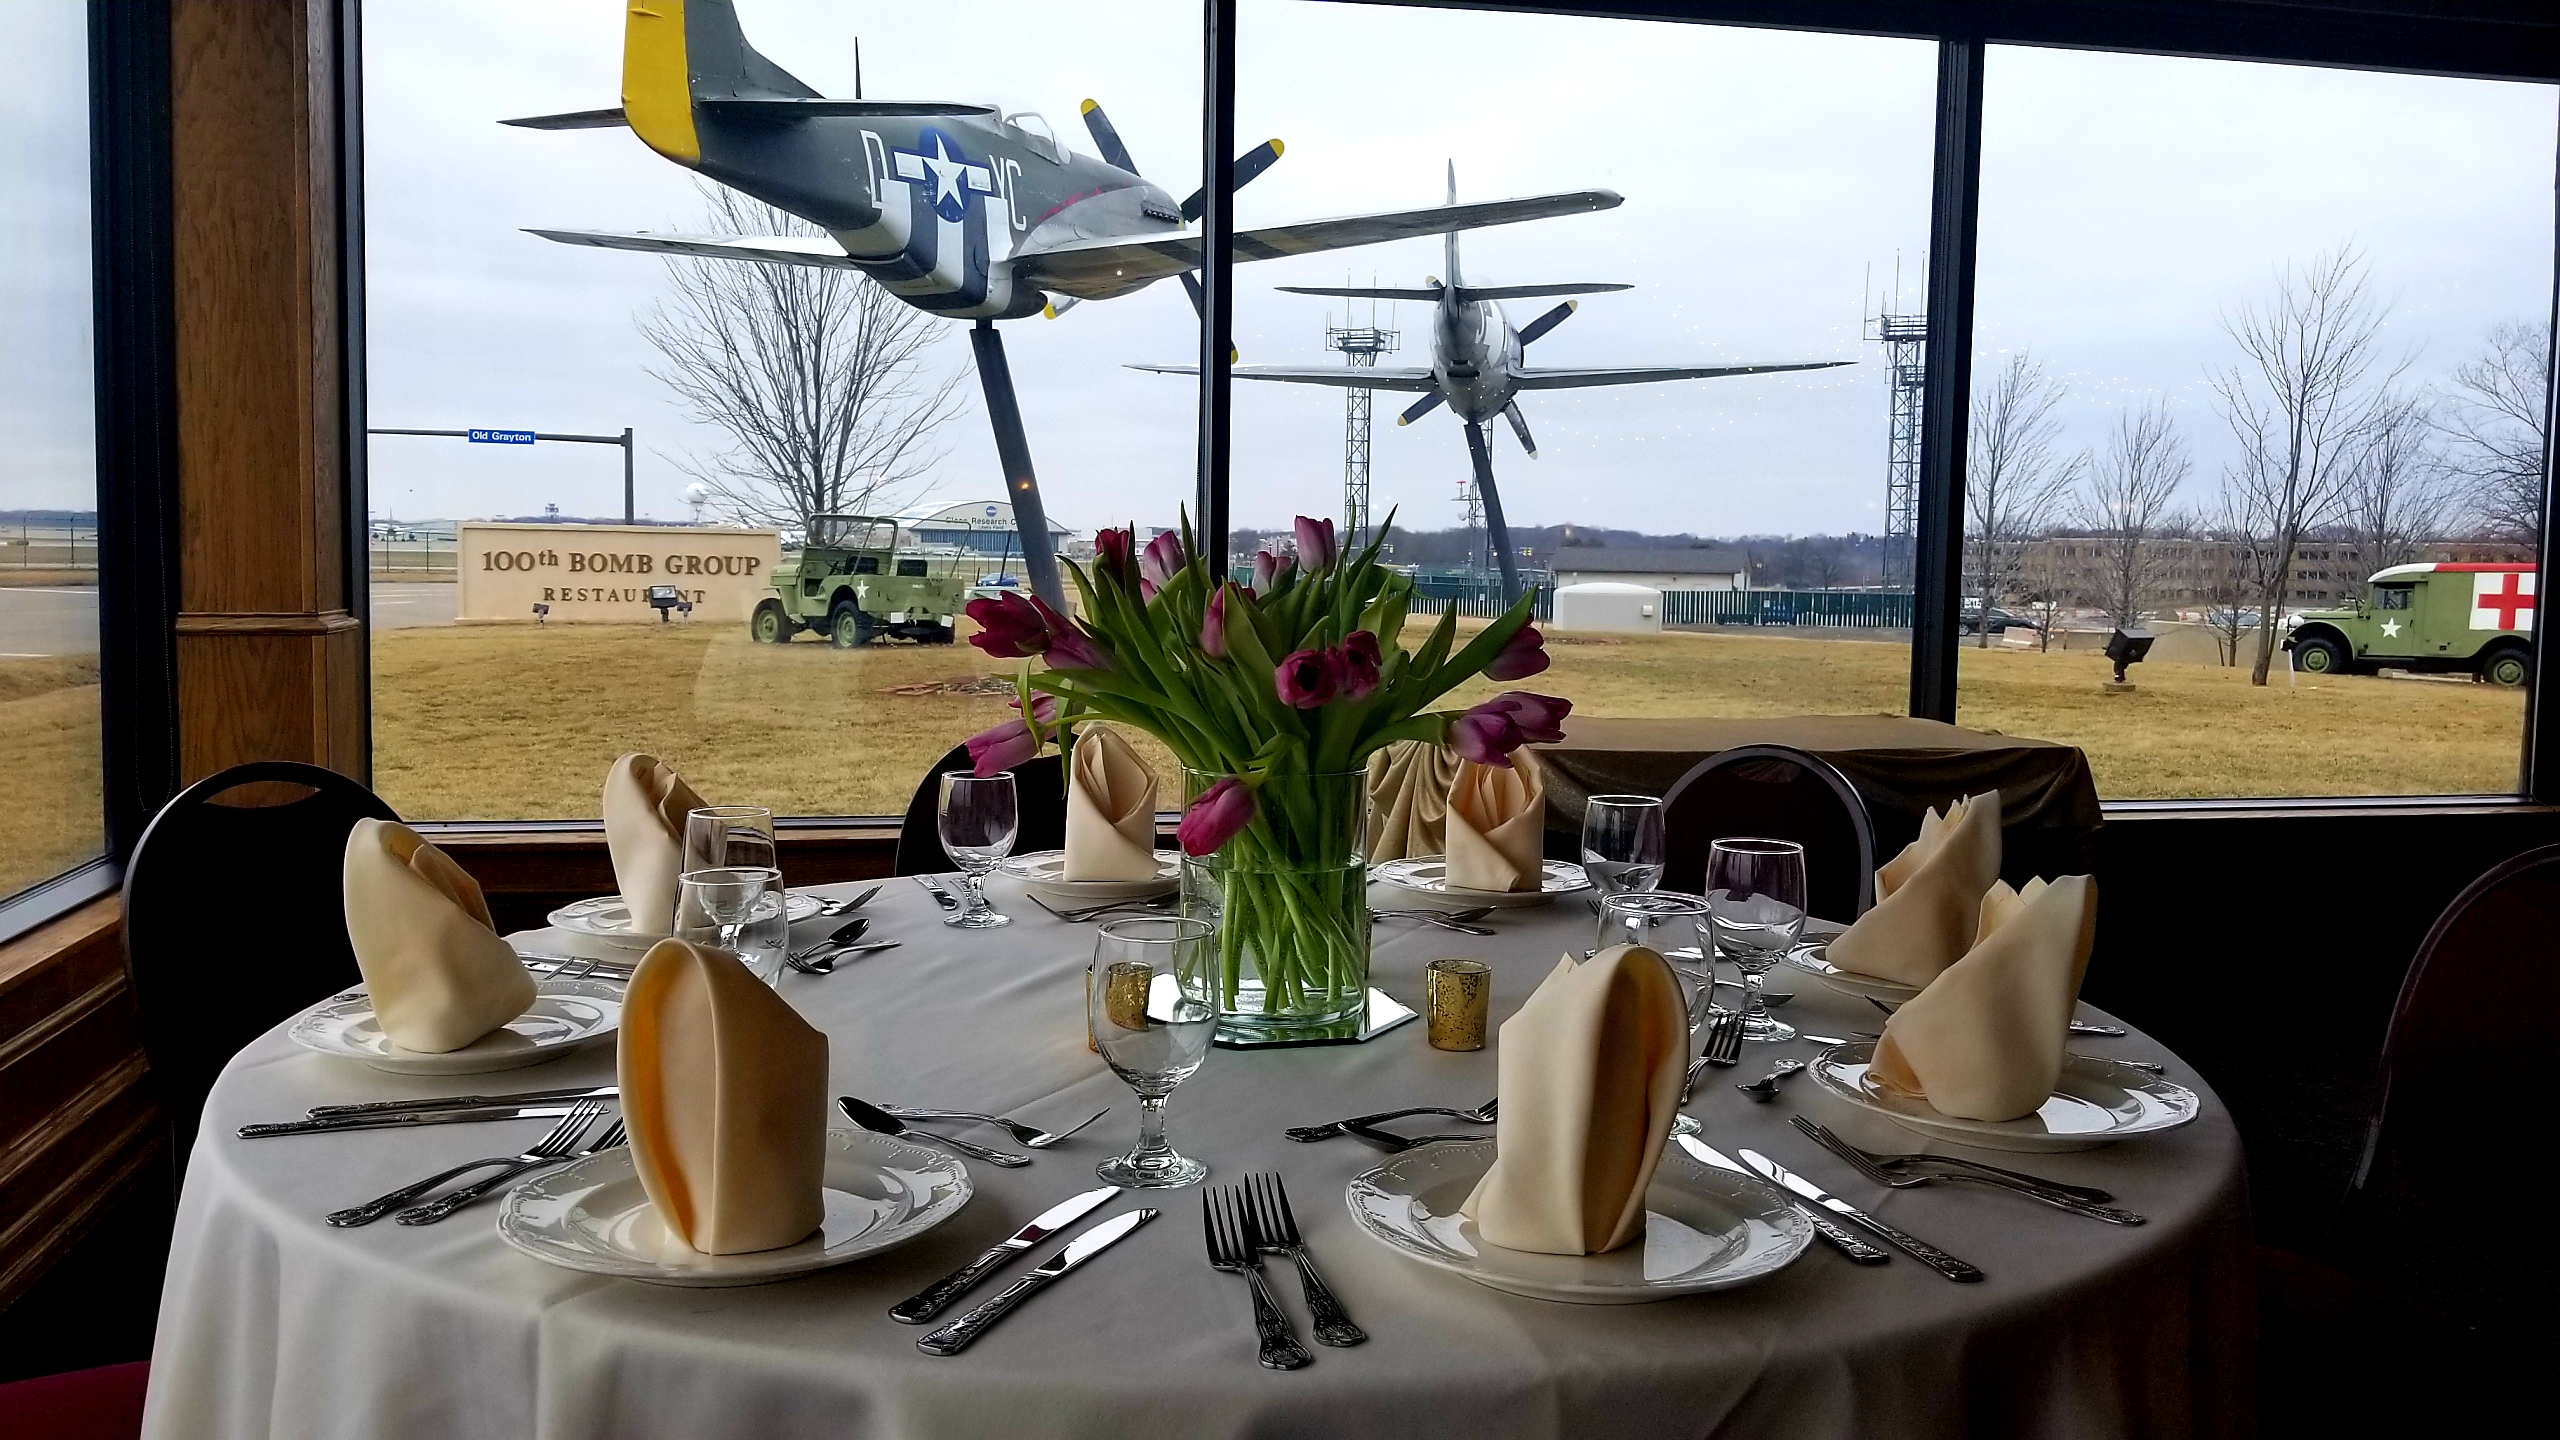 100th Bomb Group Restaurant & Events Photo